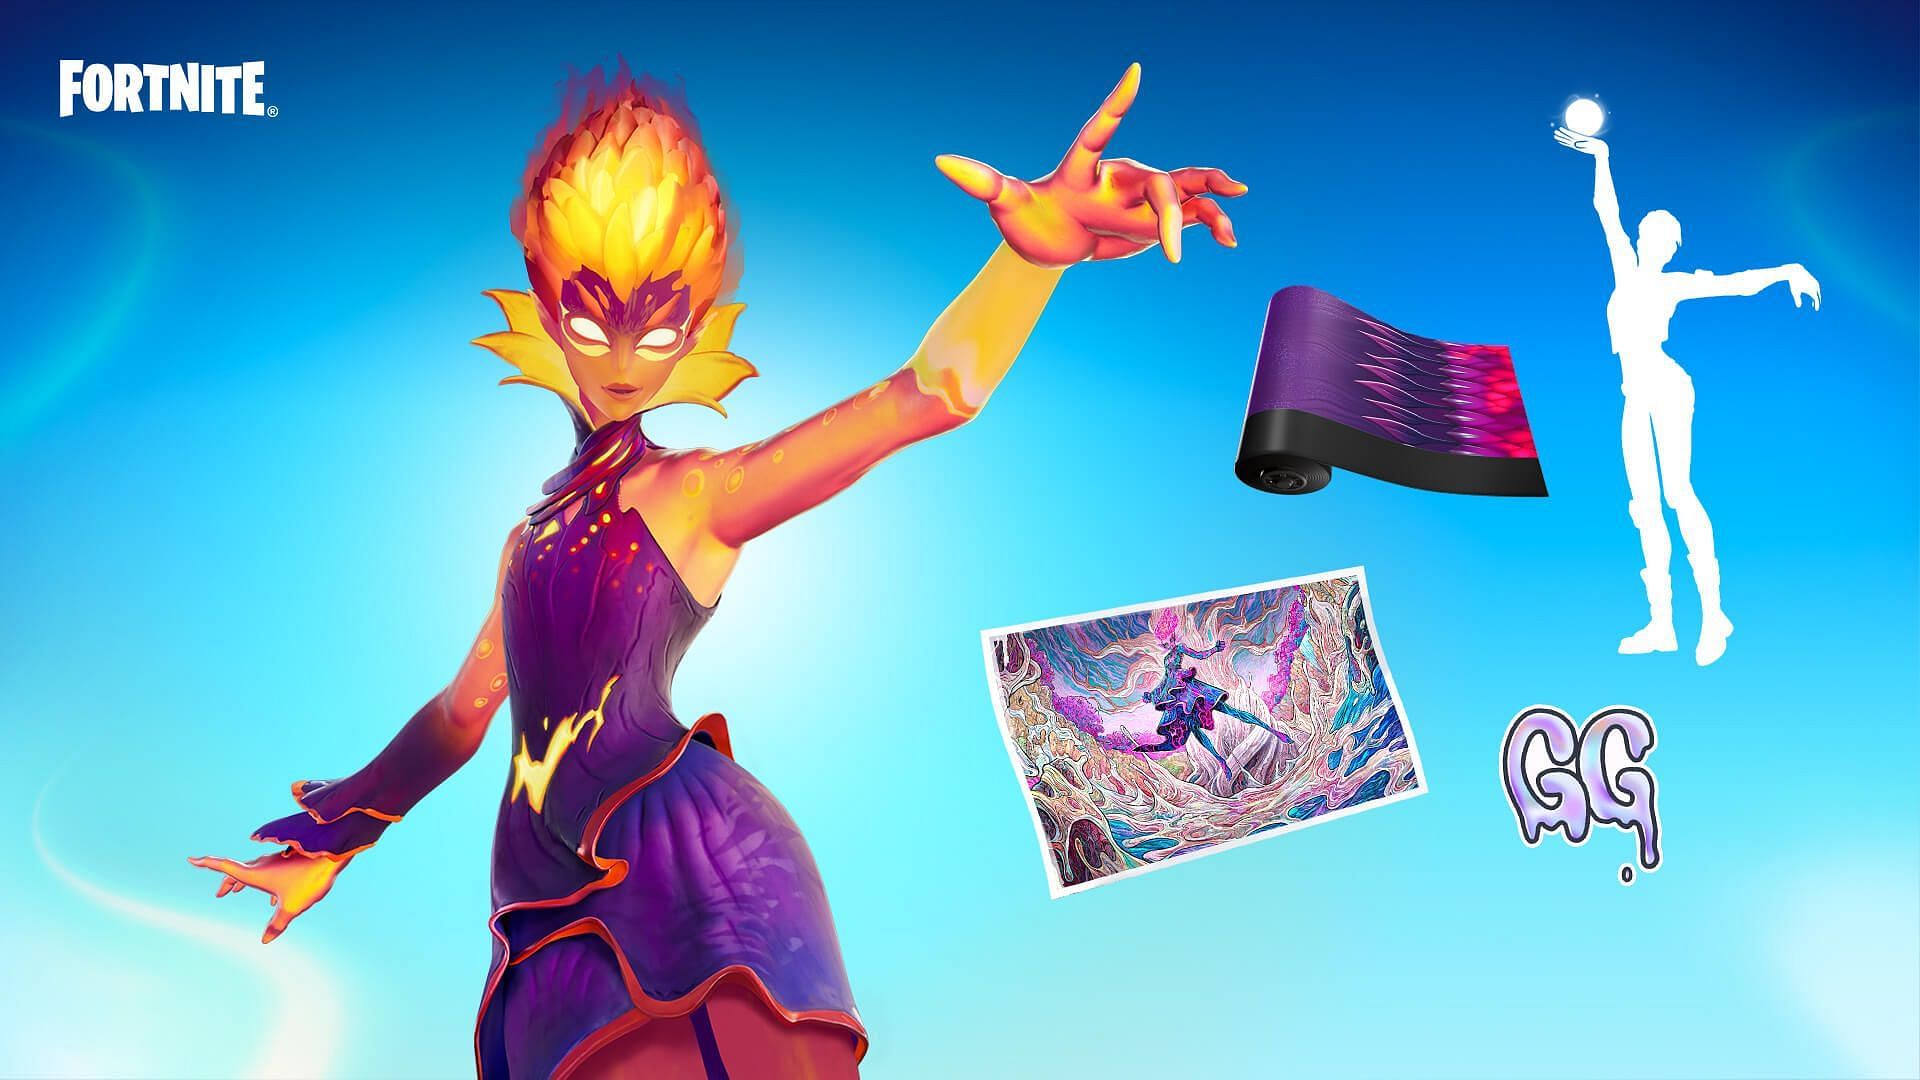 The Herald is a Battle Pass character and will not be available in the next season (Image via Epic Games)